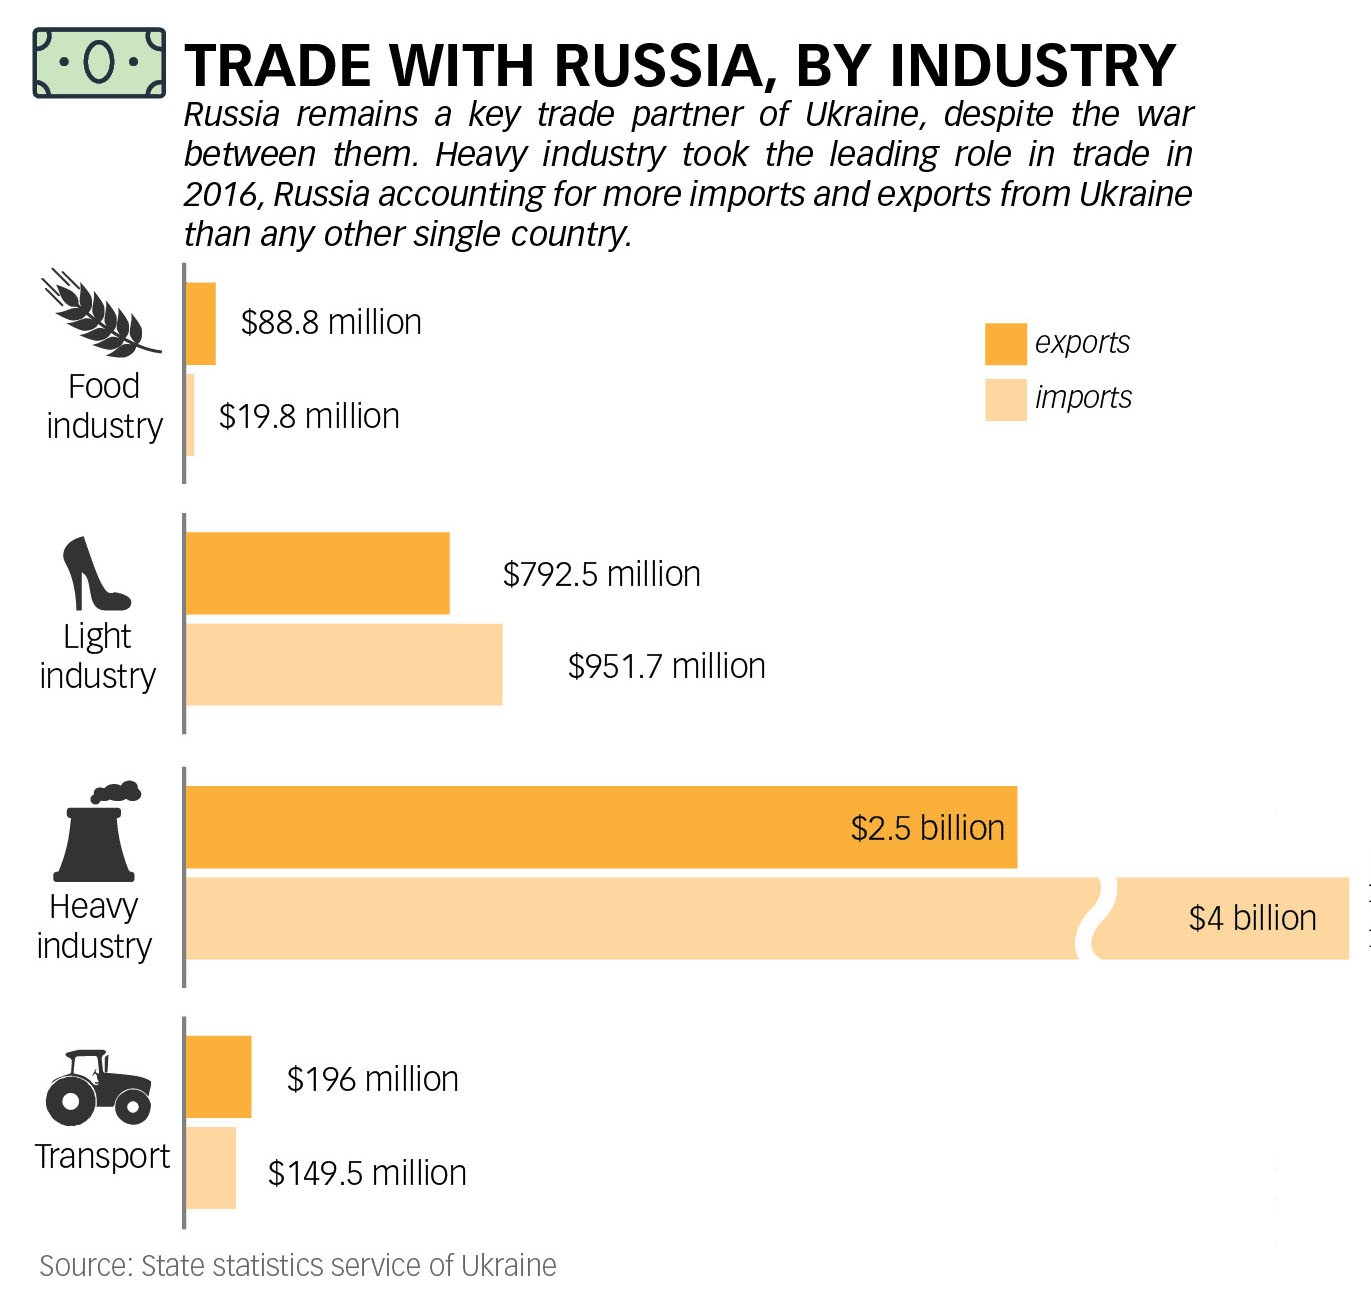 Ukraine and Russia, now at war against each other, are linked by centuries of trade, including in the heavy industrial sector during Soviet times. That bilateral trade dominates despite war.